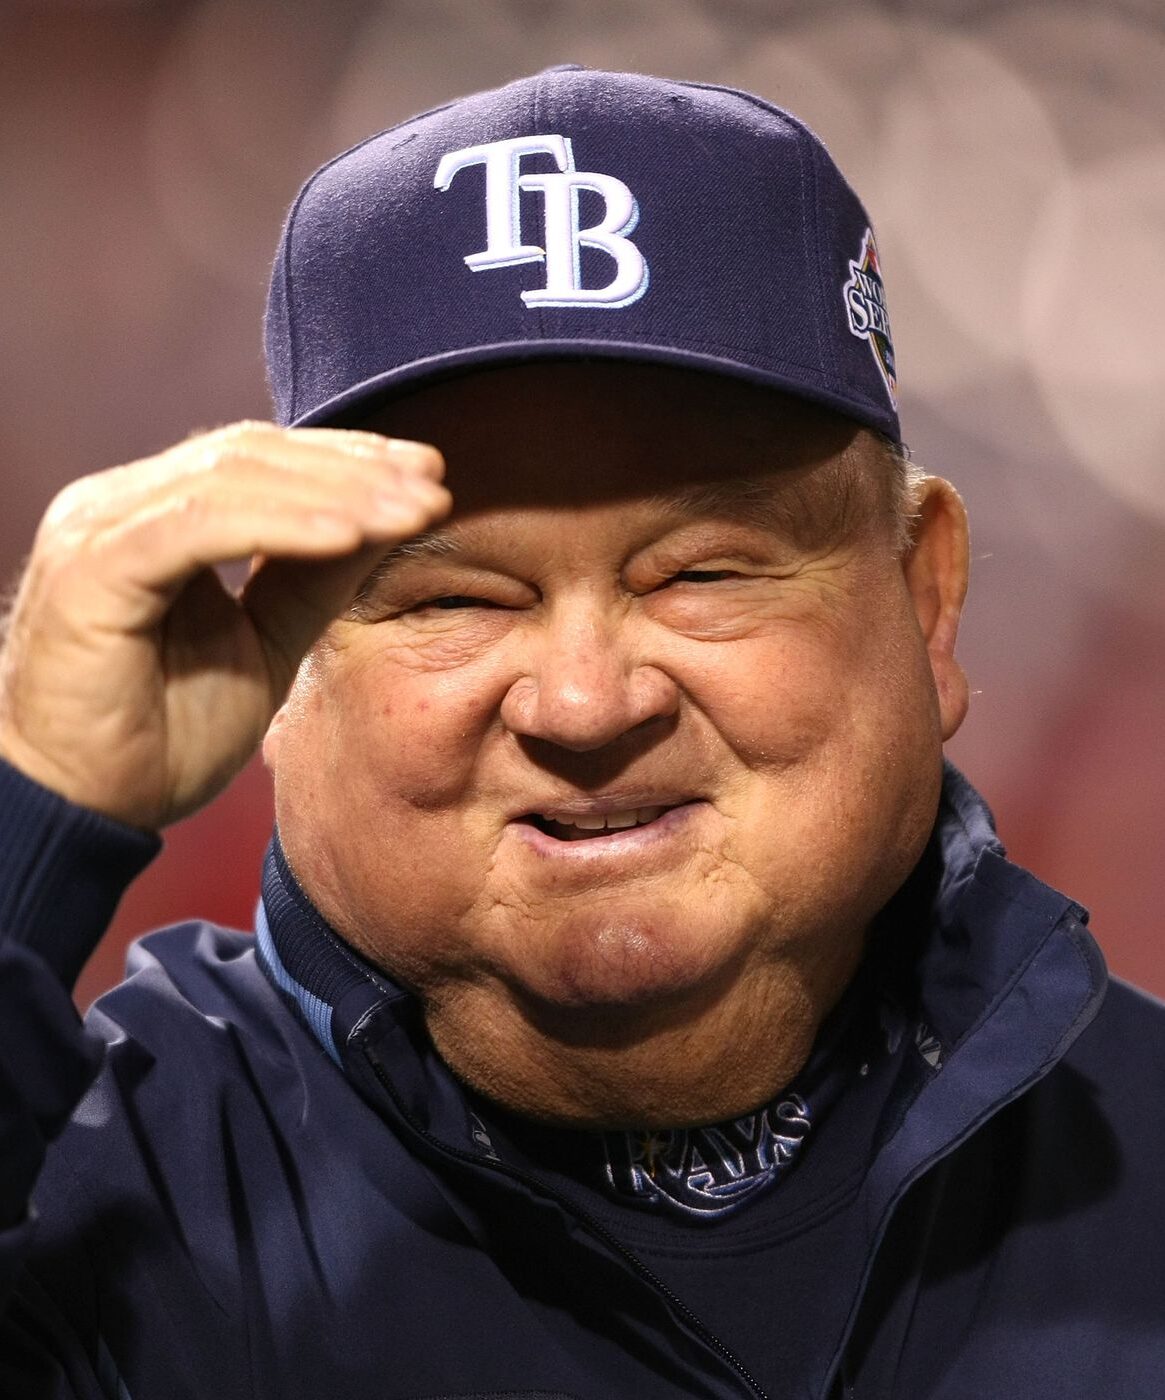 Don Zimmer's wife documented every day of his 66-year career in